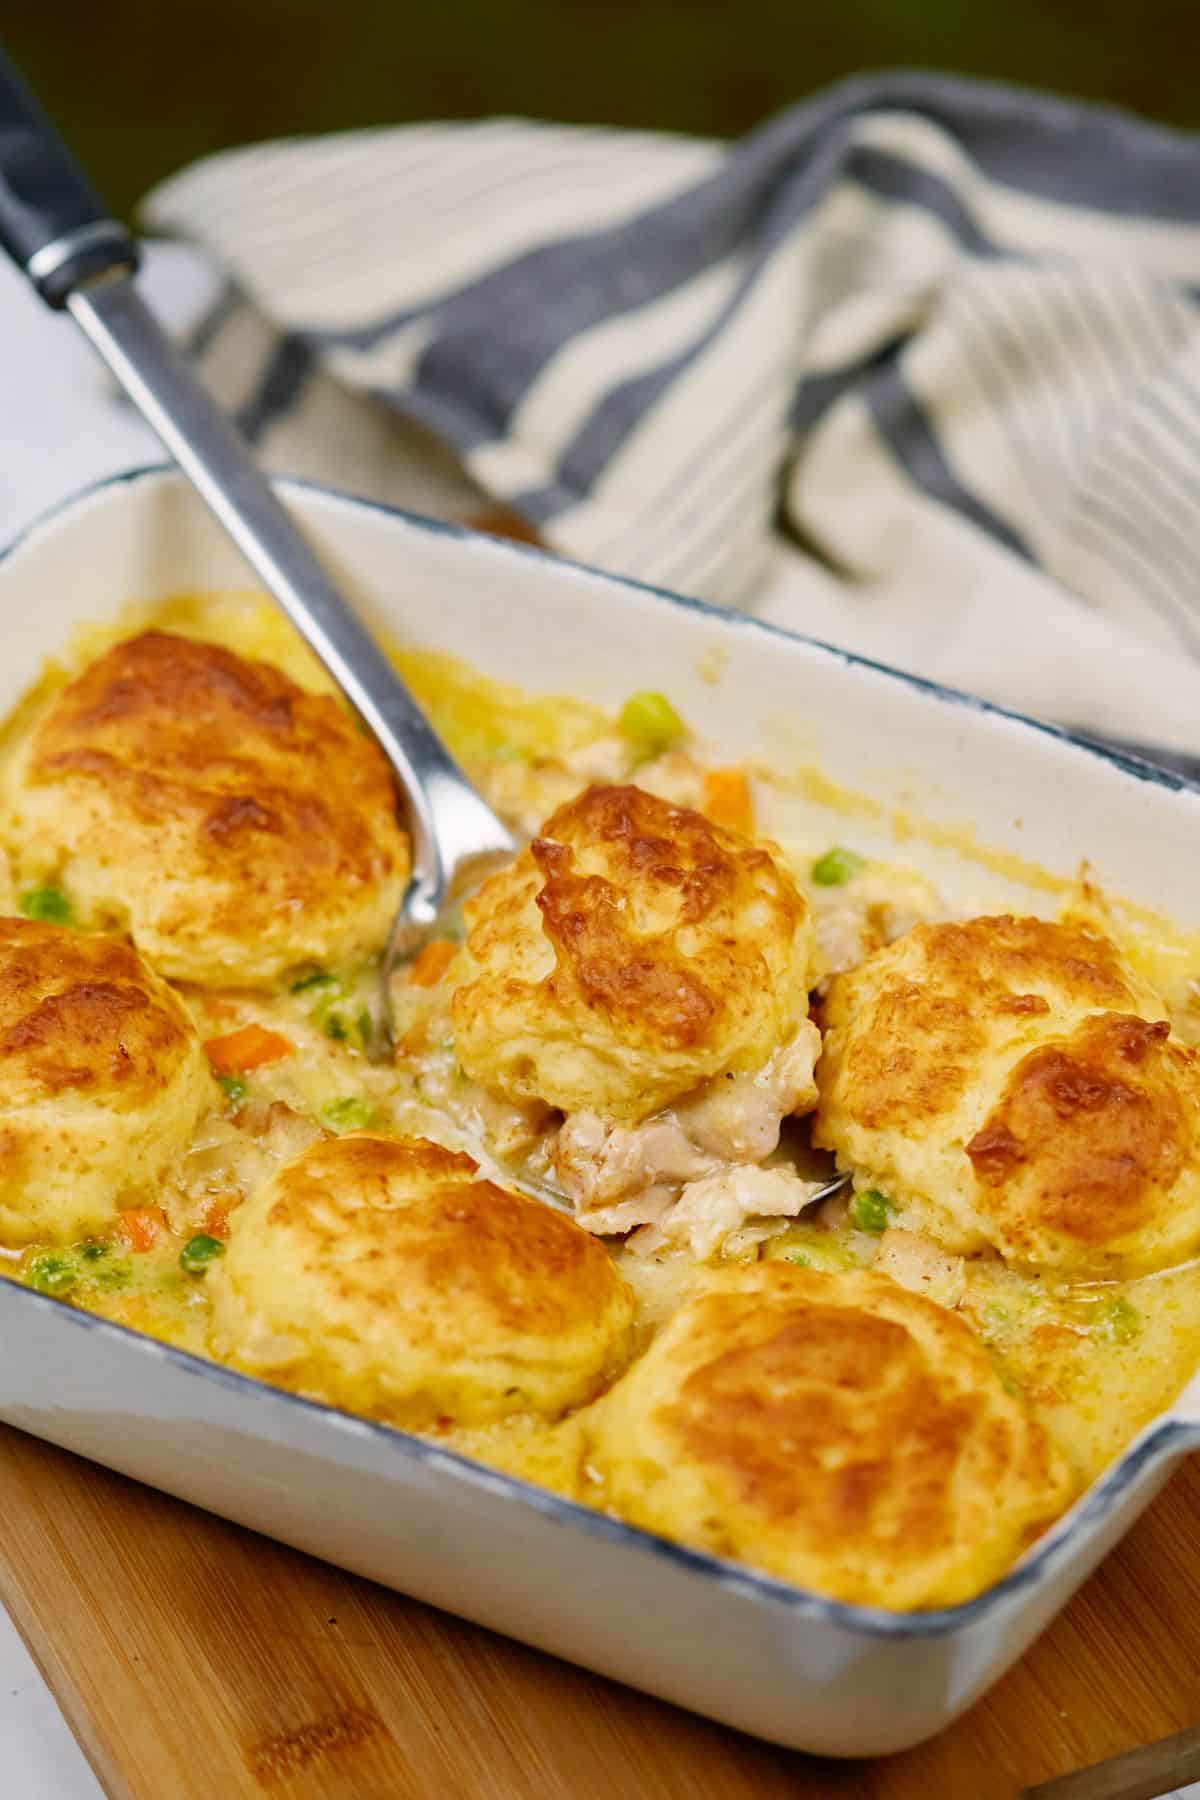 casserole dish of chicken and dumplings on table by striped napkin